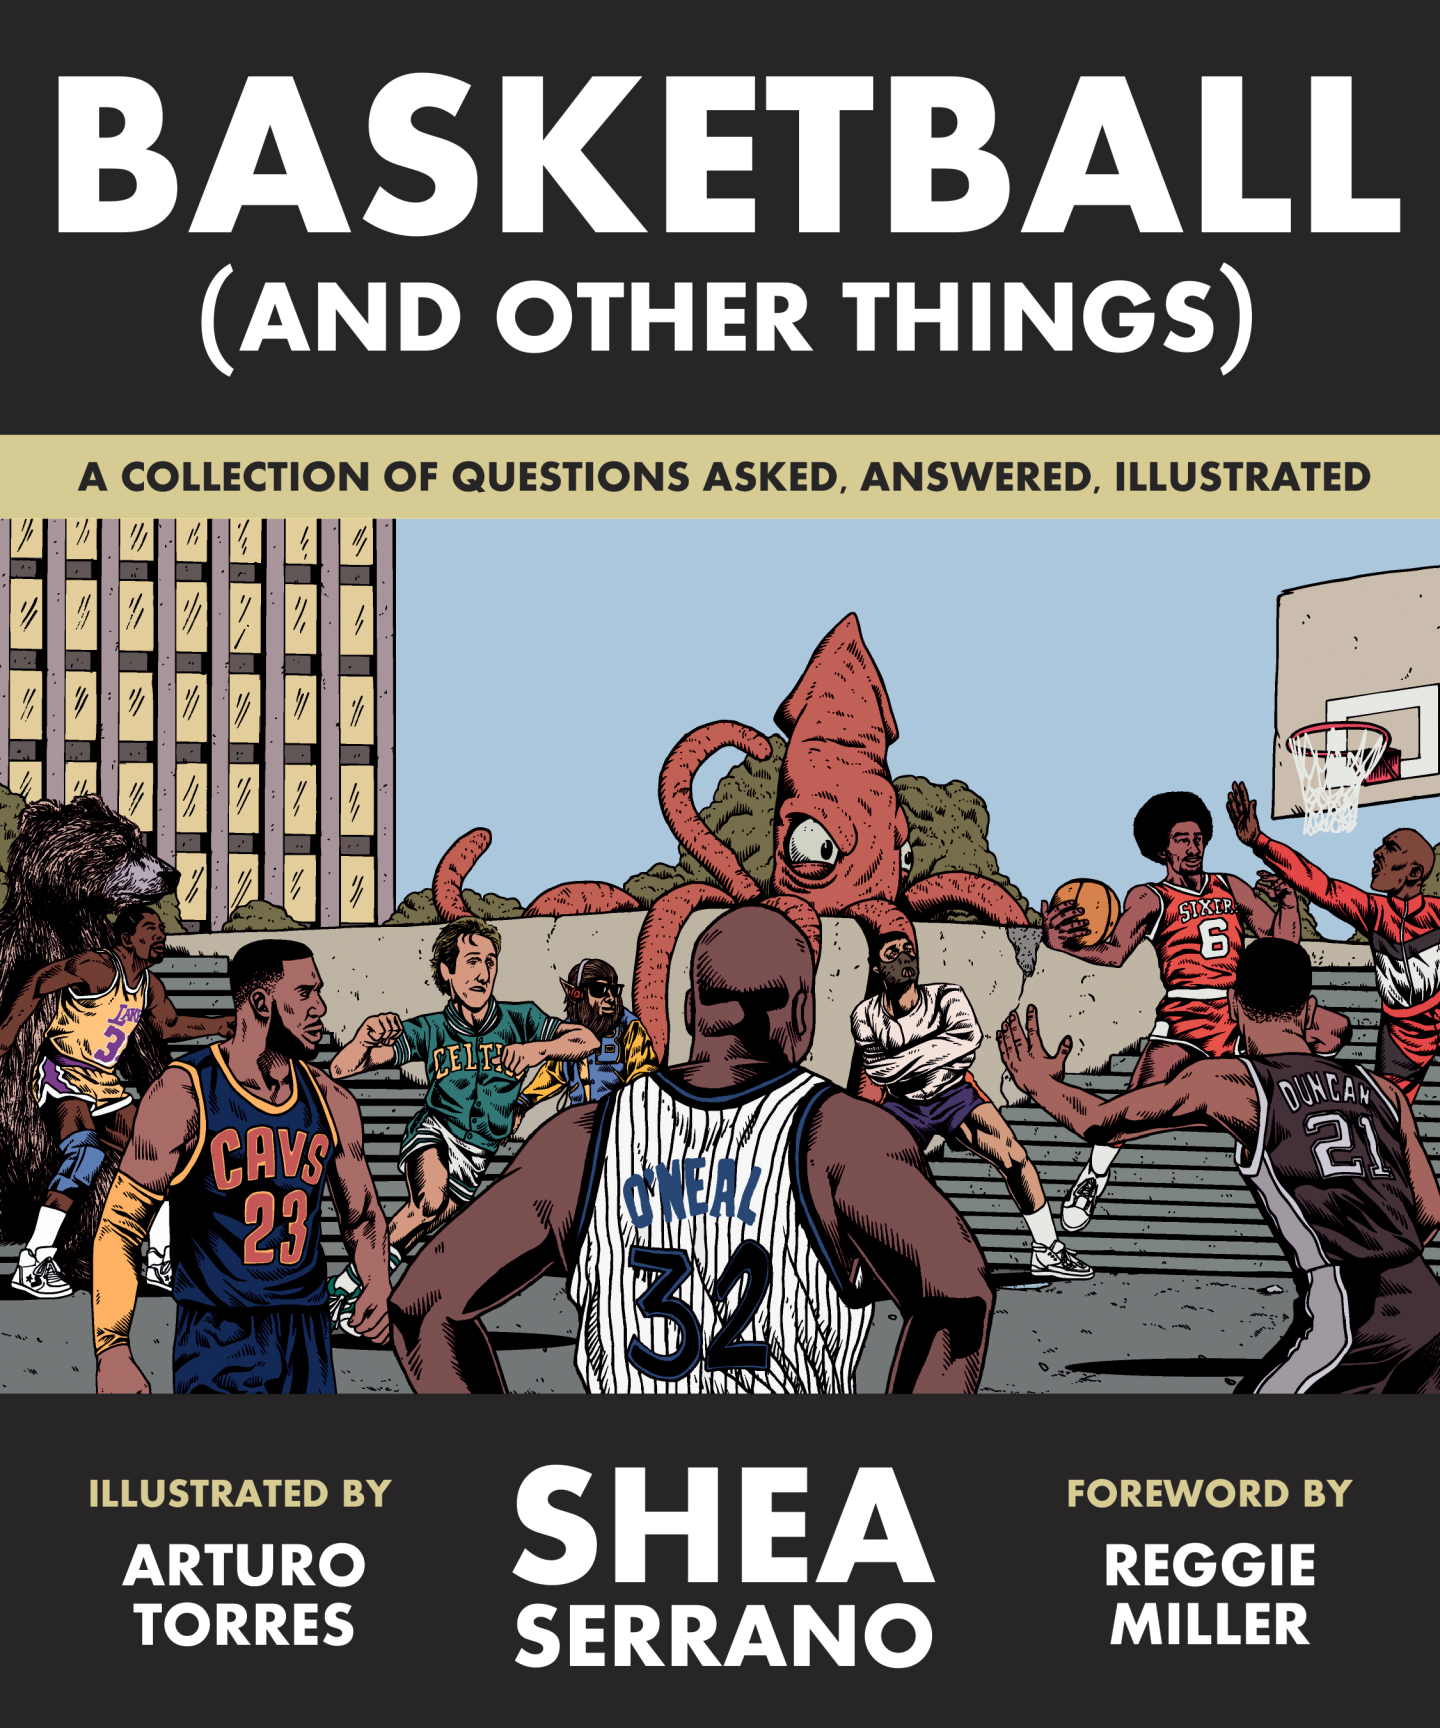 Shea Serrano on his new basketball book and building the nicest army of fans on Earth